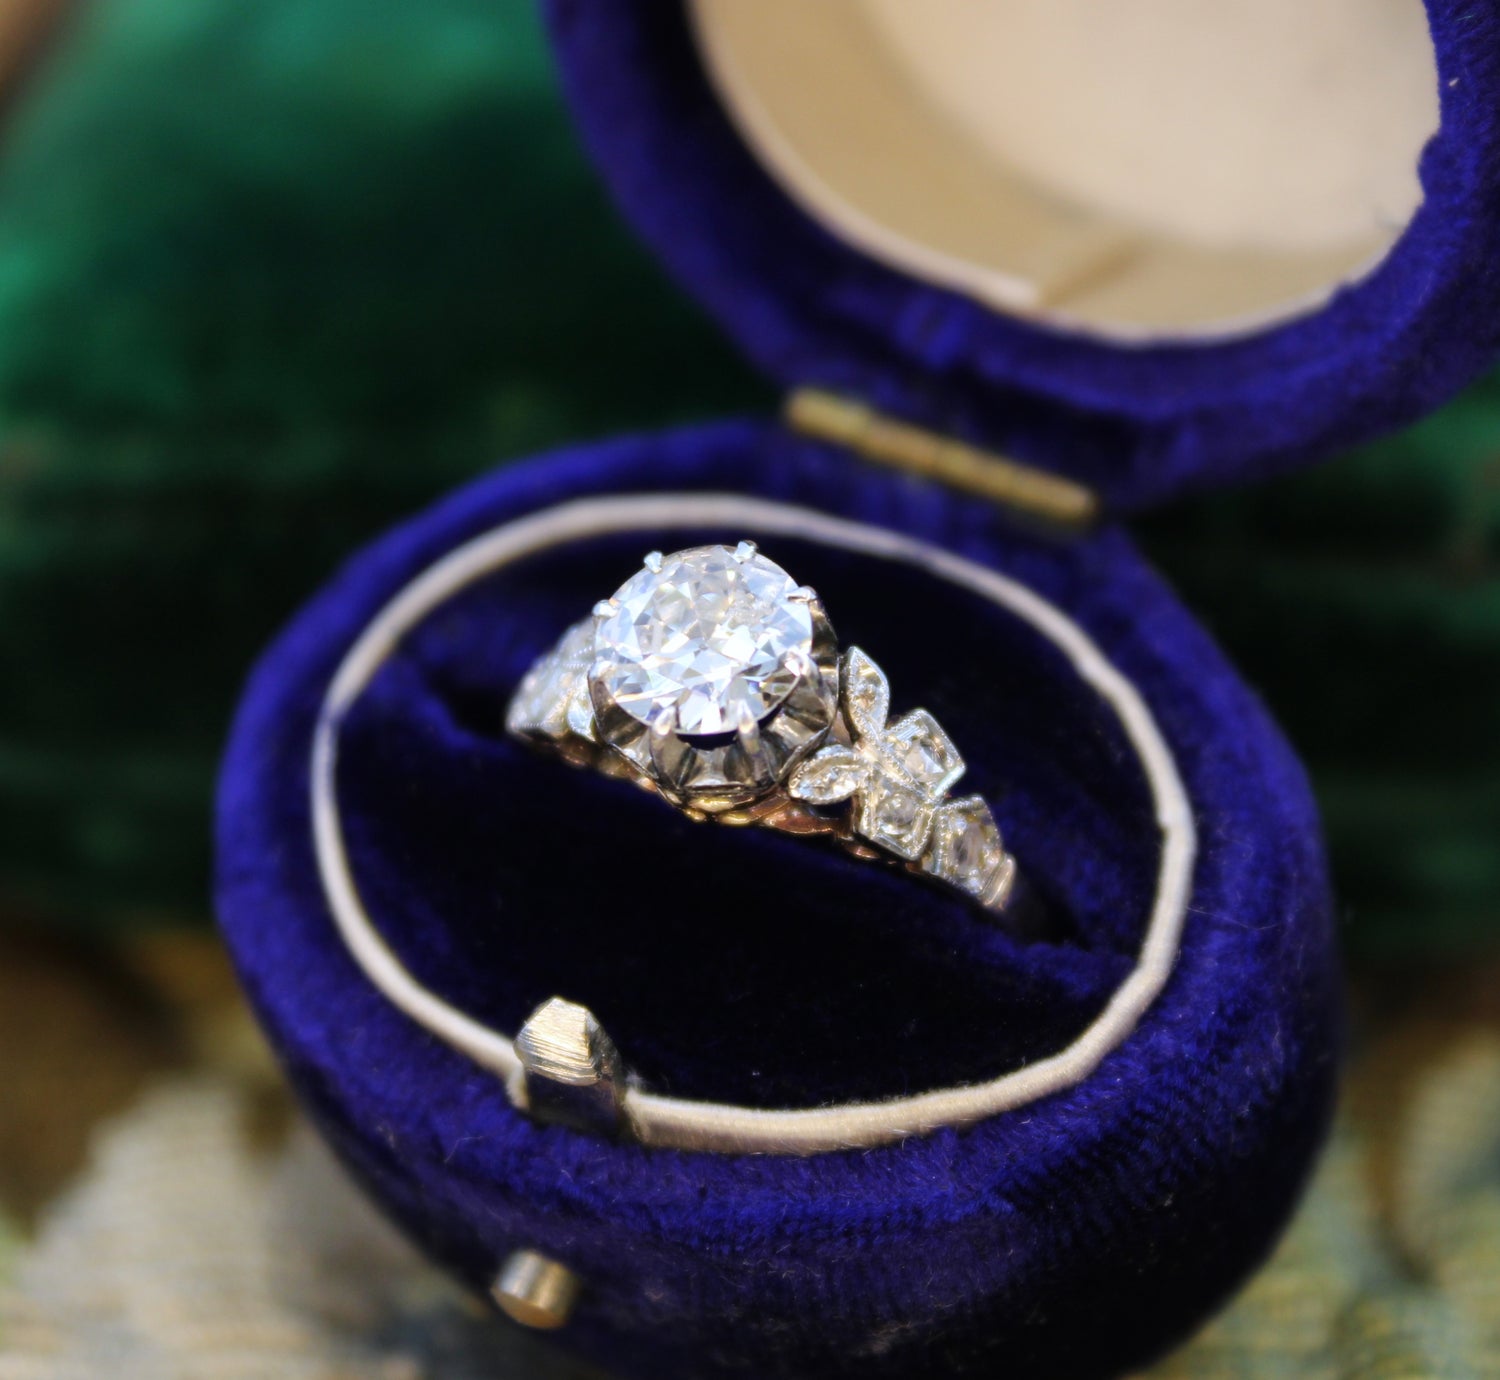 A Beautiful 0.85 Carat Diamond Solitaire Engagement Ring, with detailed Diamond set Foliate Shoulders, Plausibly English, Circa 1920 - Robin Haydock Antiques